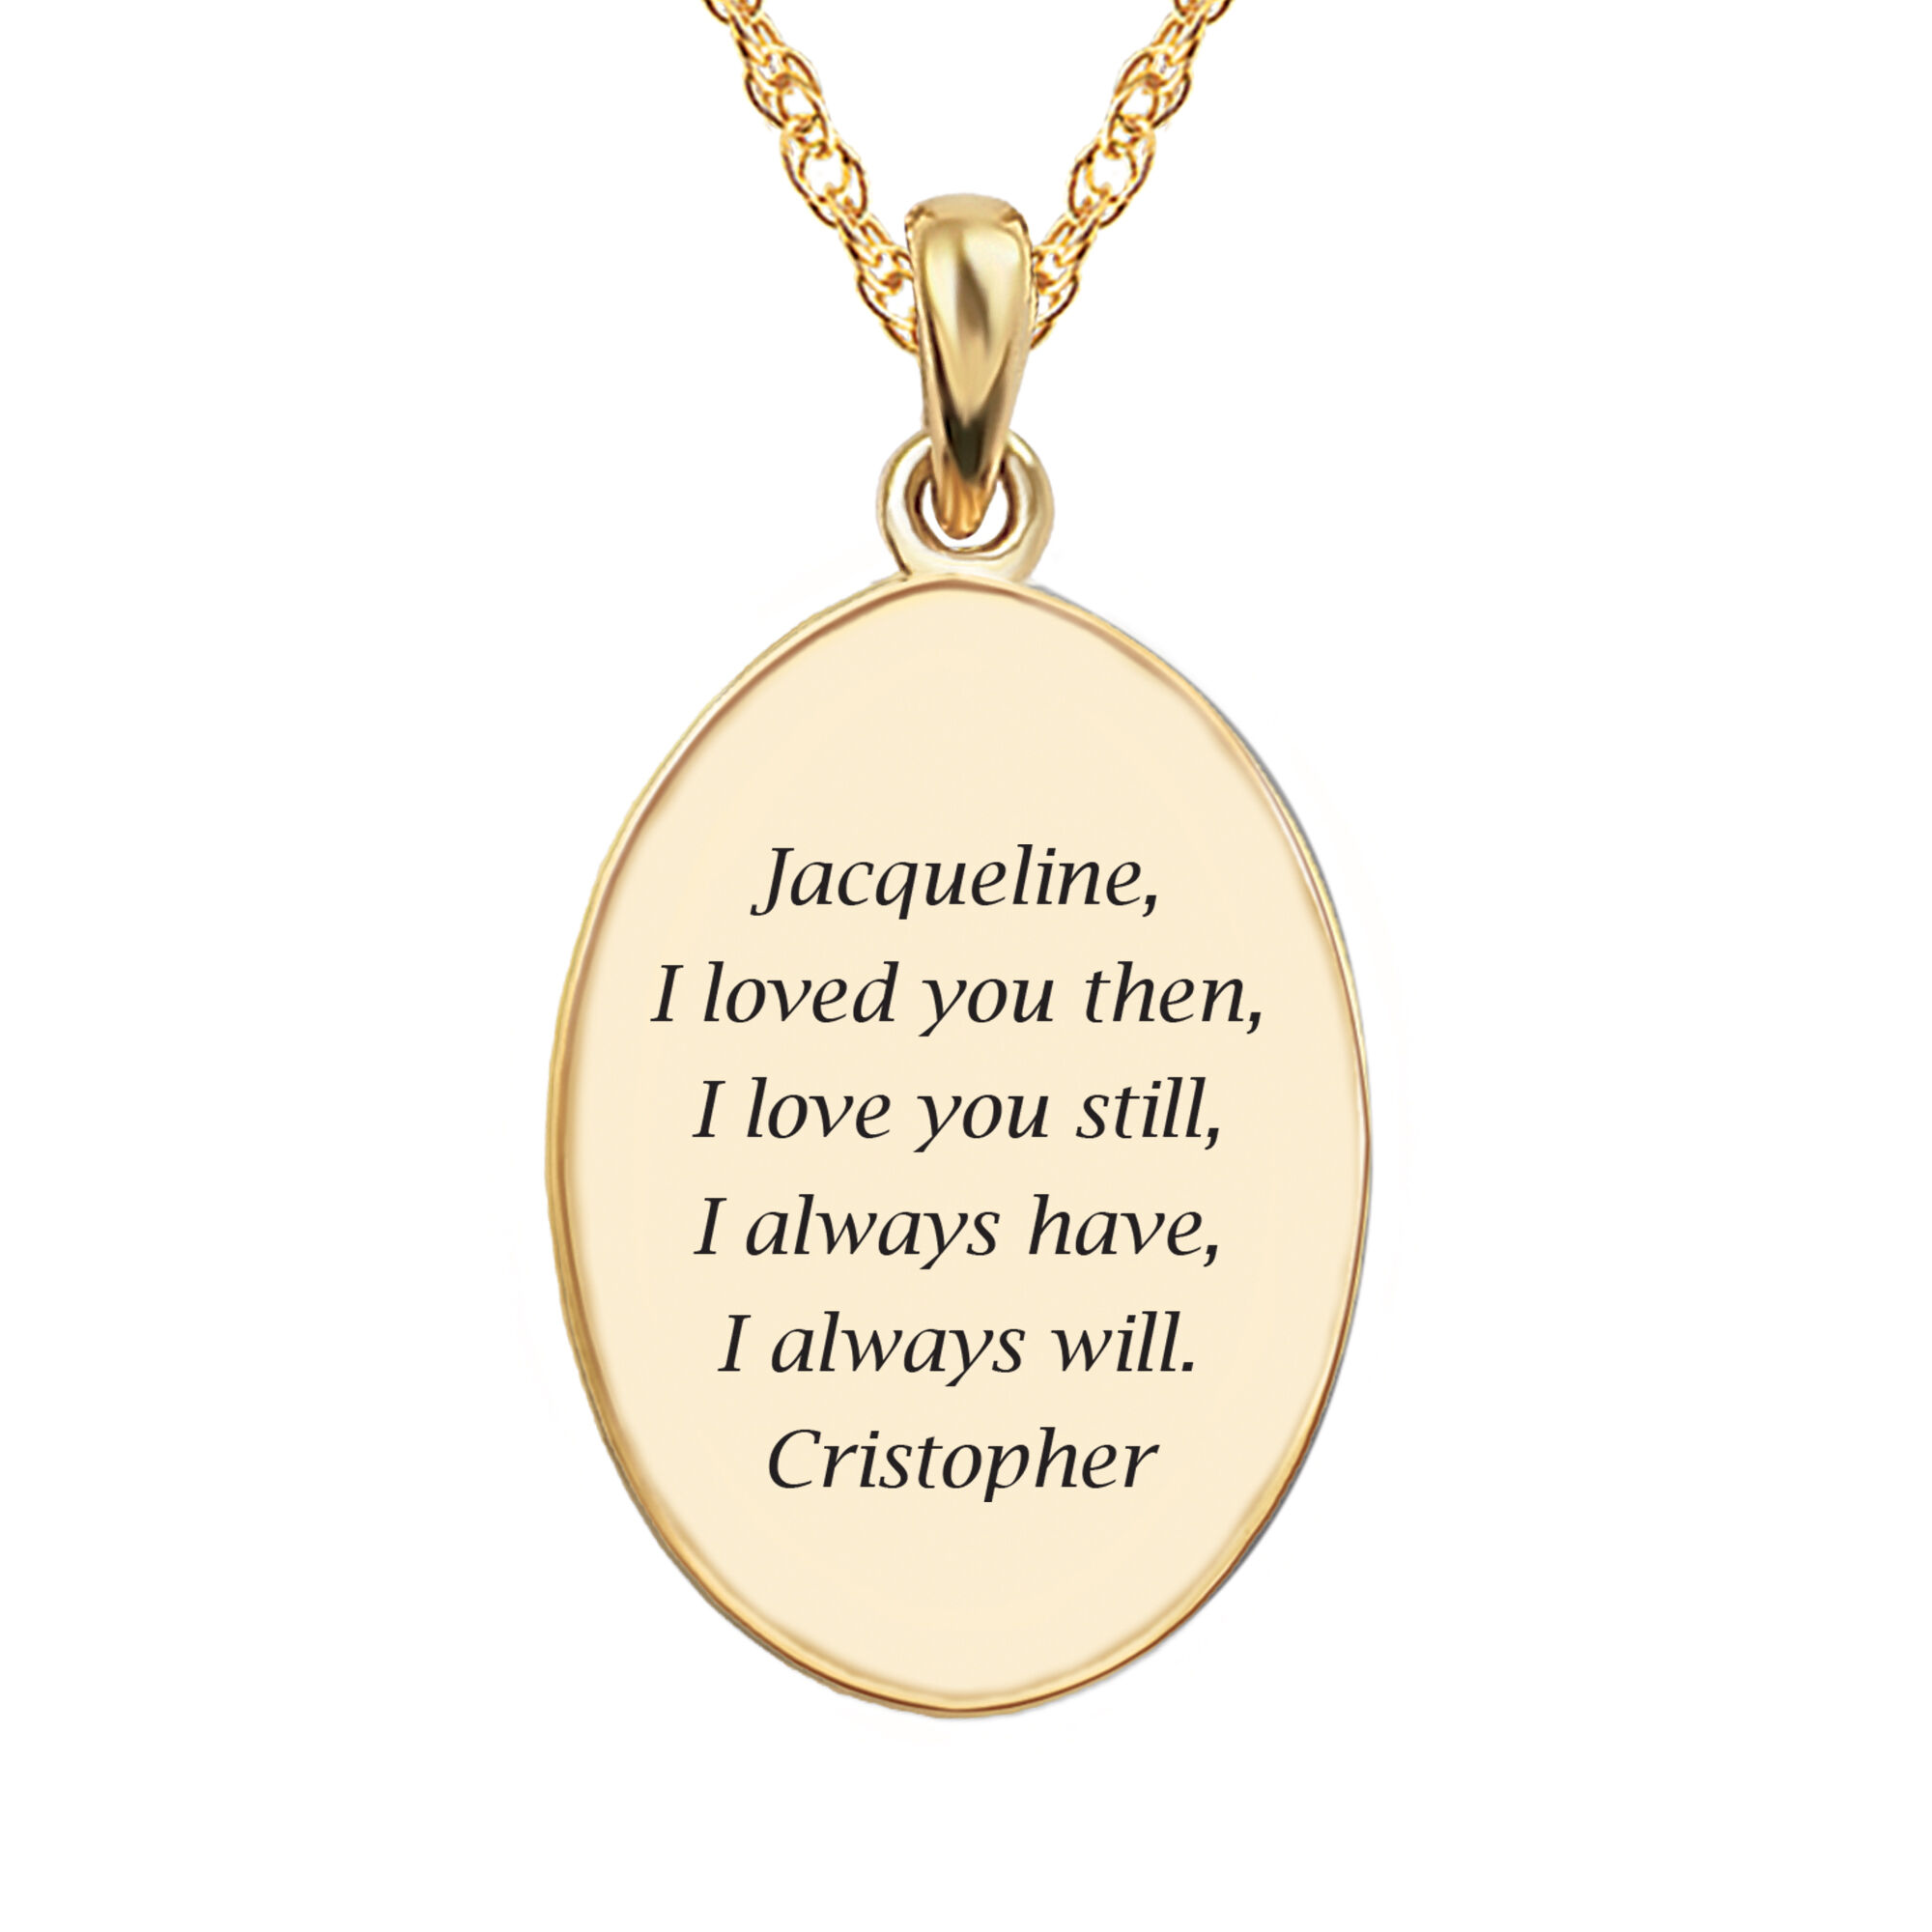 I Love You Personalized Diamond Pendant with FREE Matching Earrings 5238 0250 b back